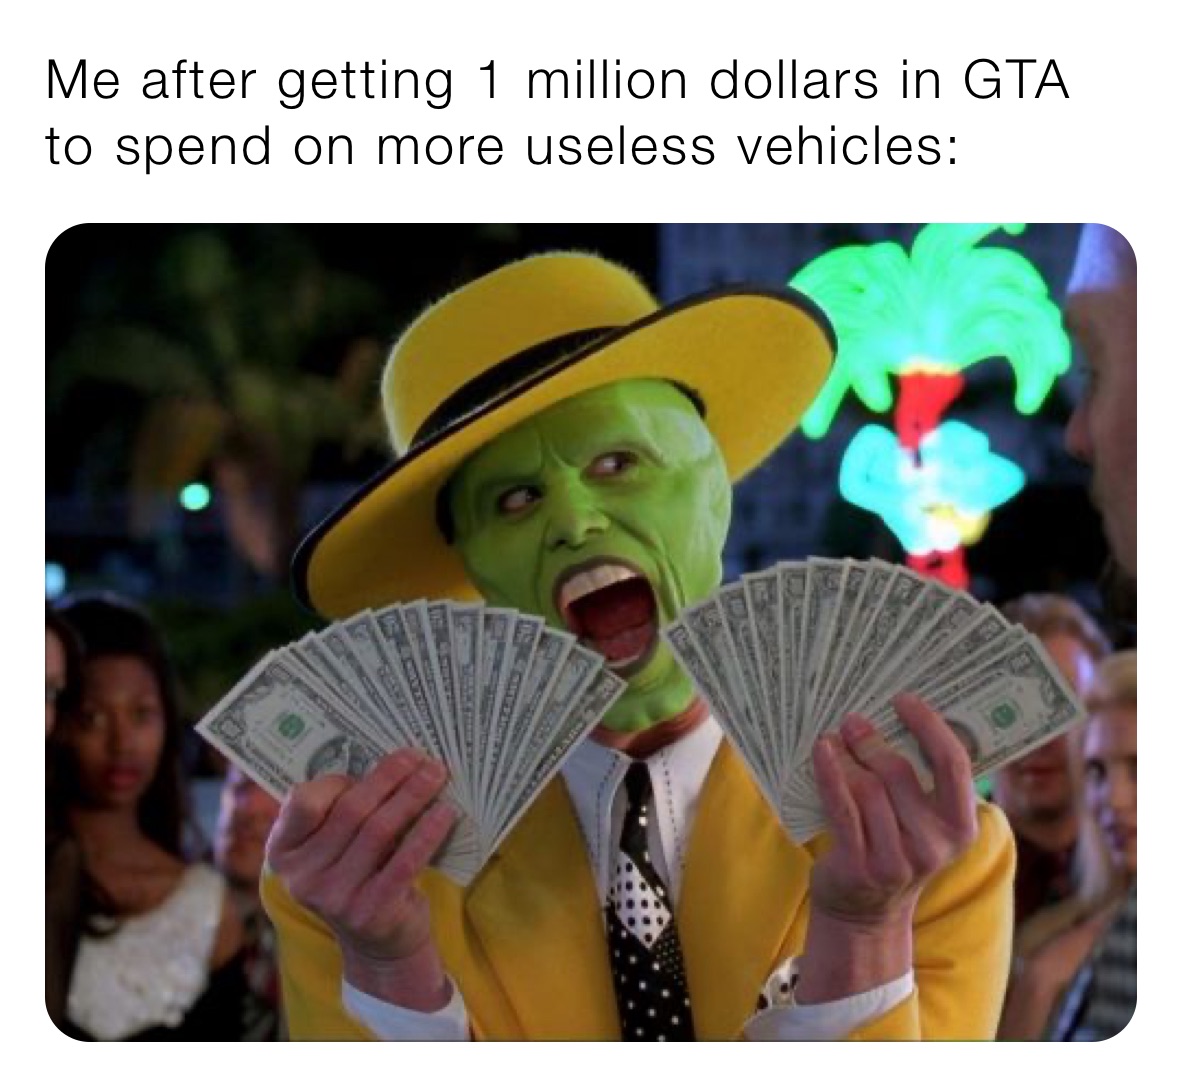 Me after getting 1 million dollars in GTA to spend on more useless vehicles: 